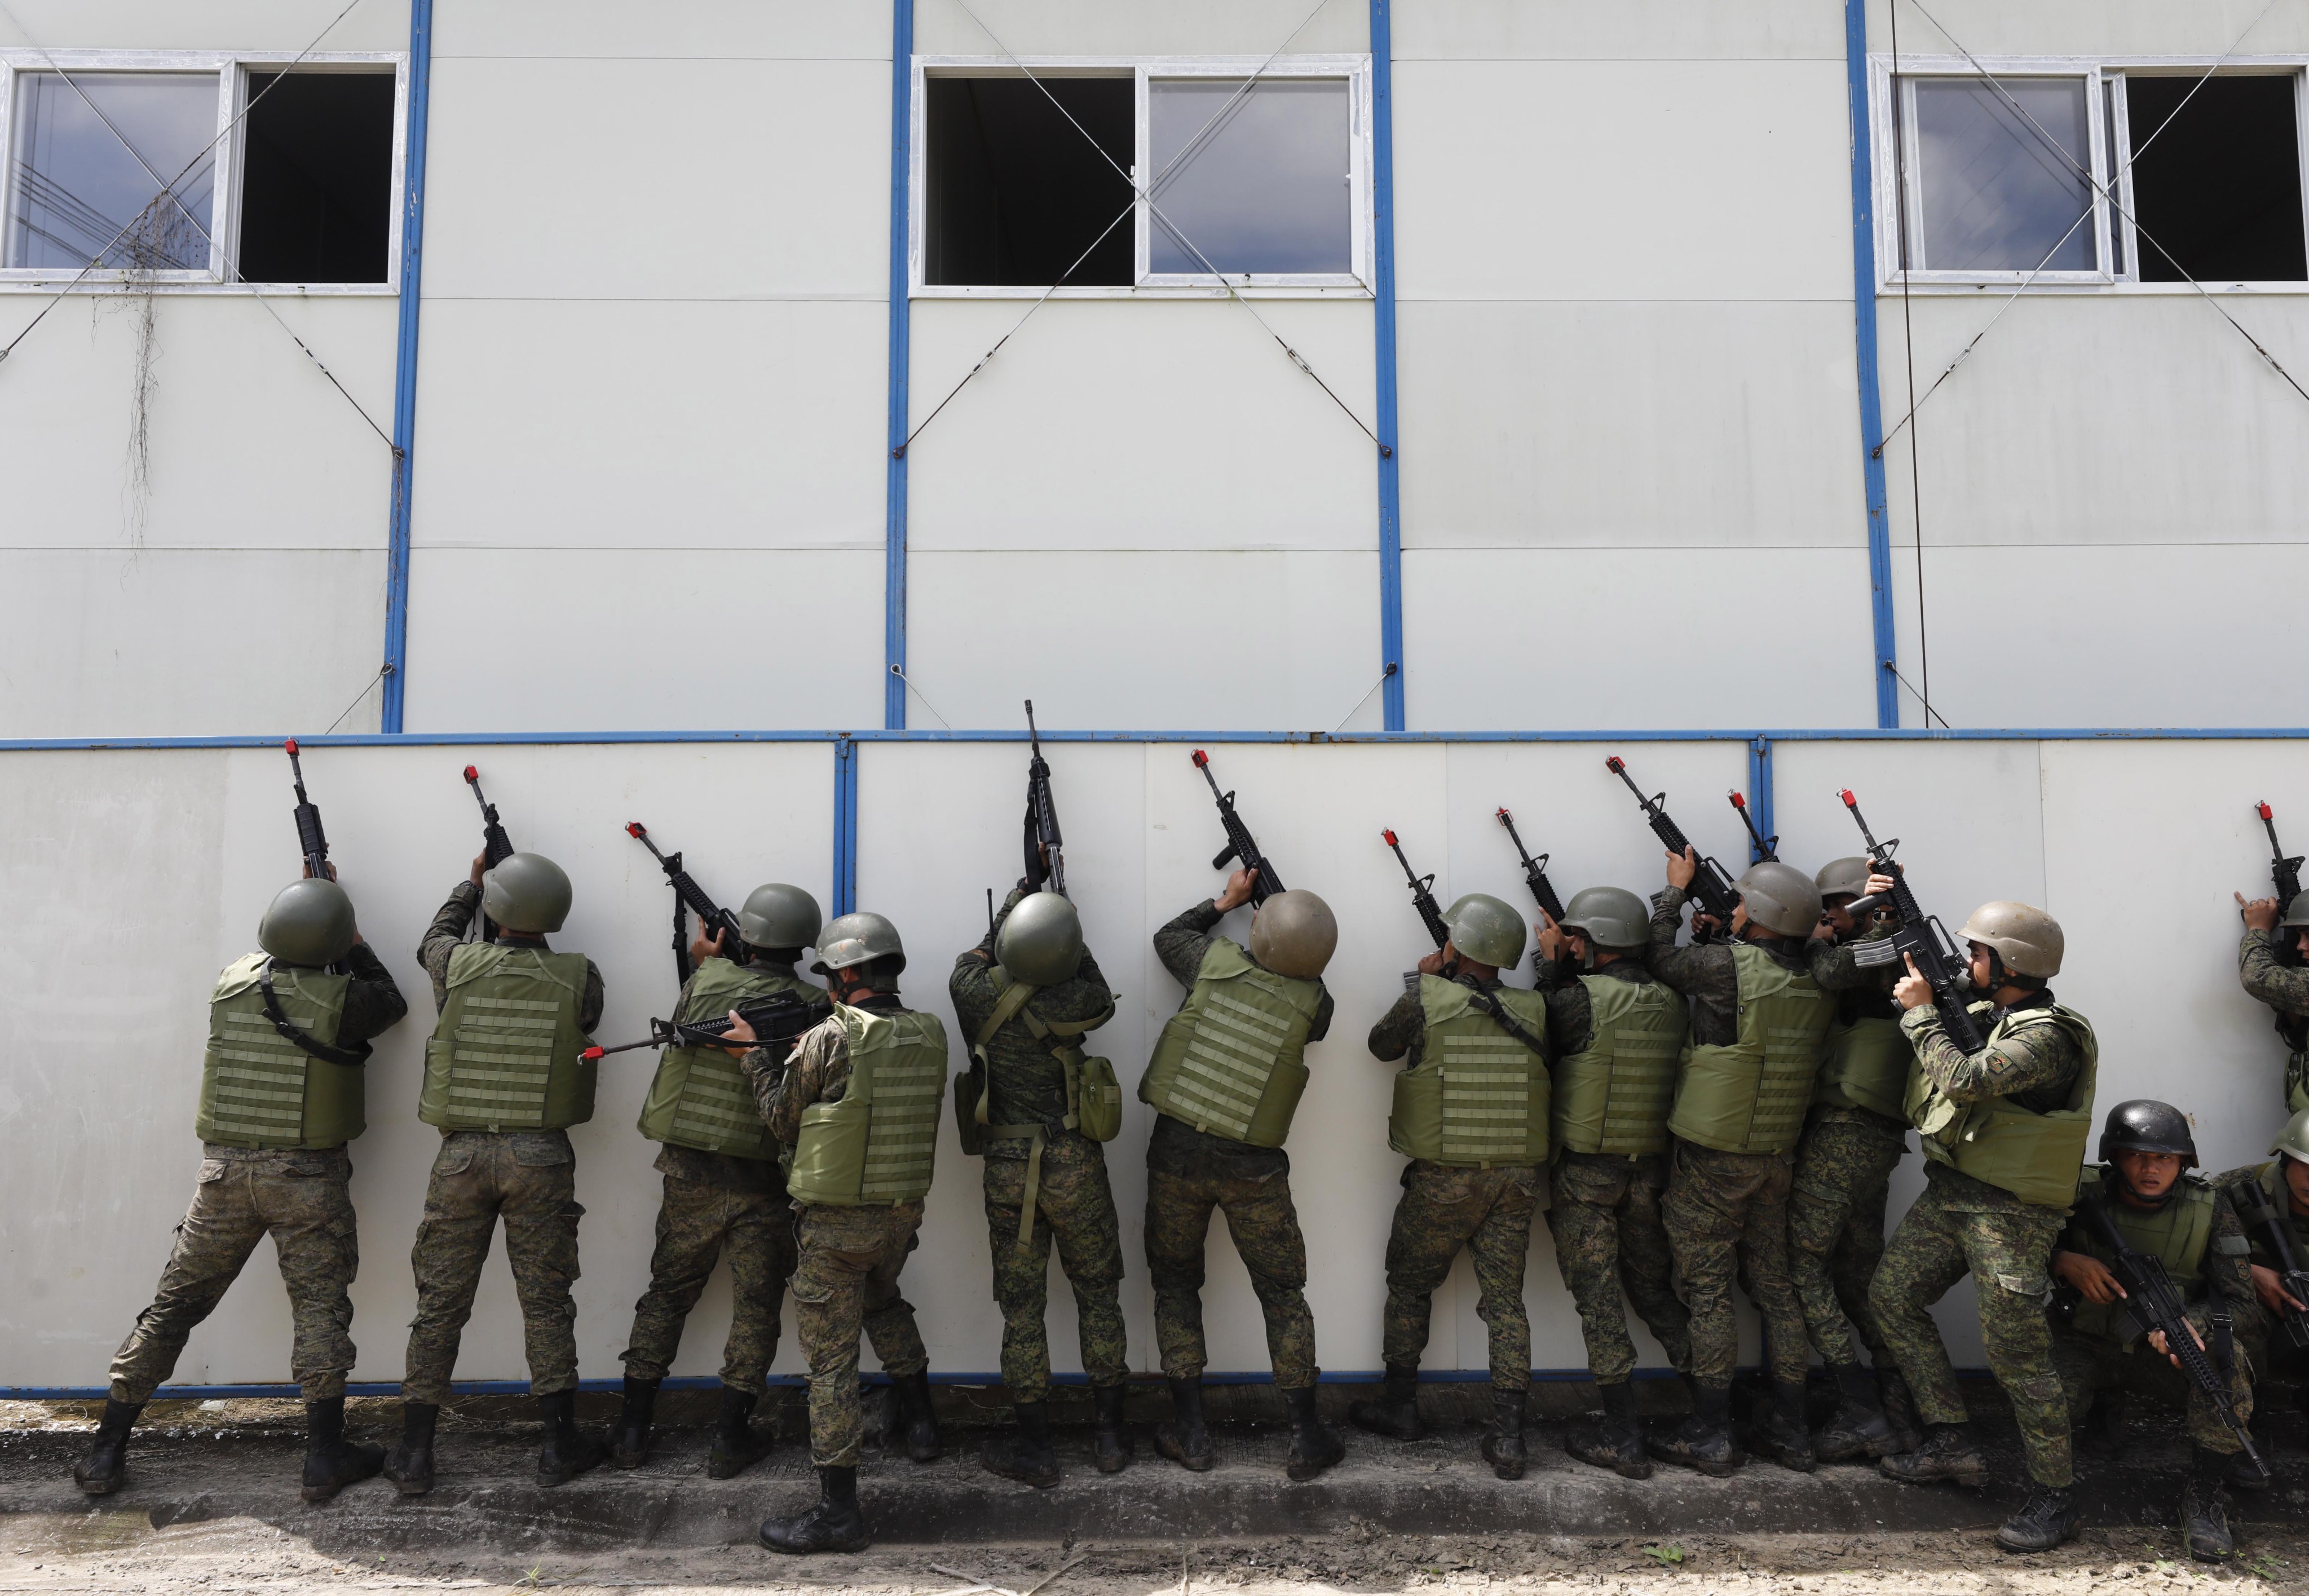 Soldiers of the Armed Forces of the Philippines take cover beside a wall during an assault exercise at Fort Magsaysay military camp north of Manila. Photo: EPA-EFE